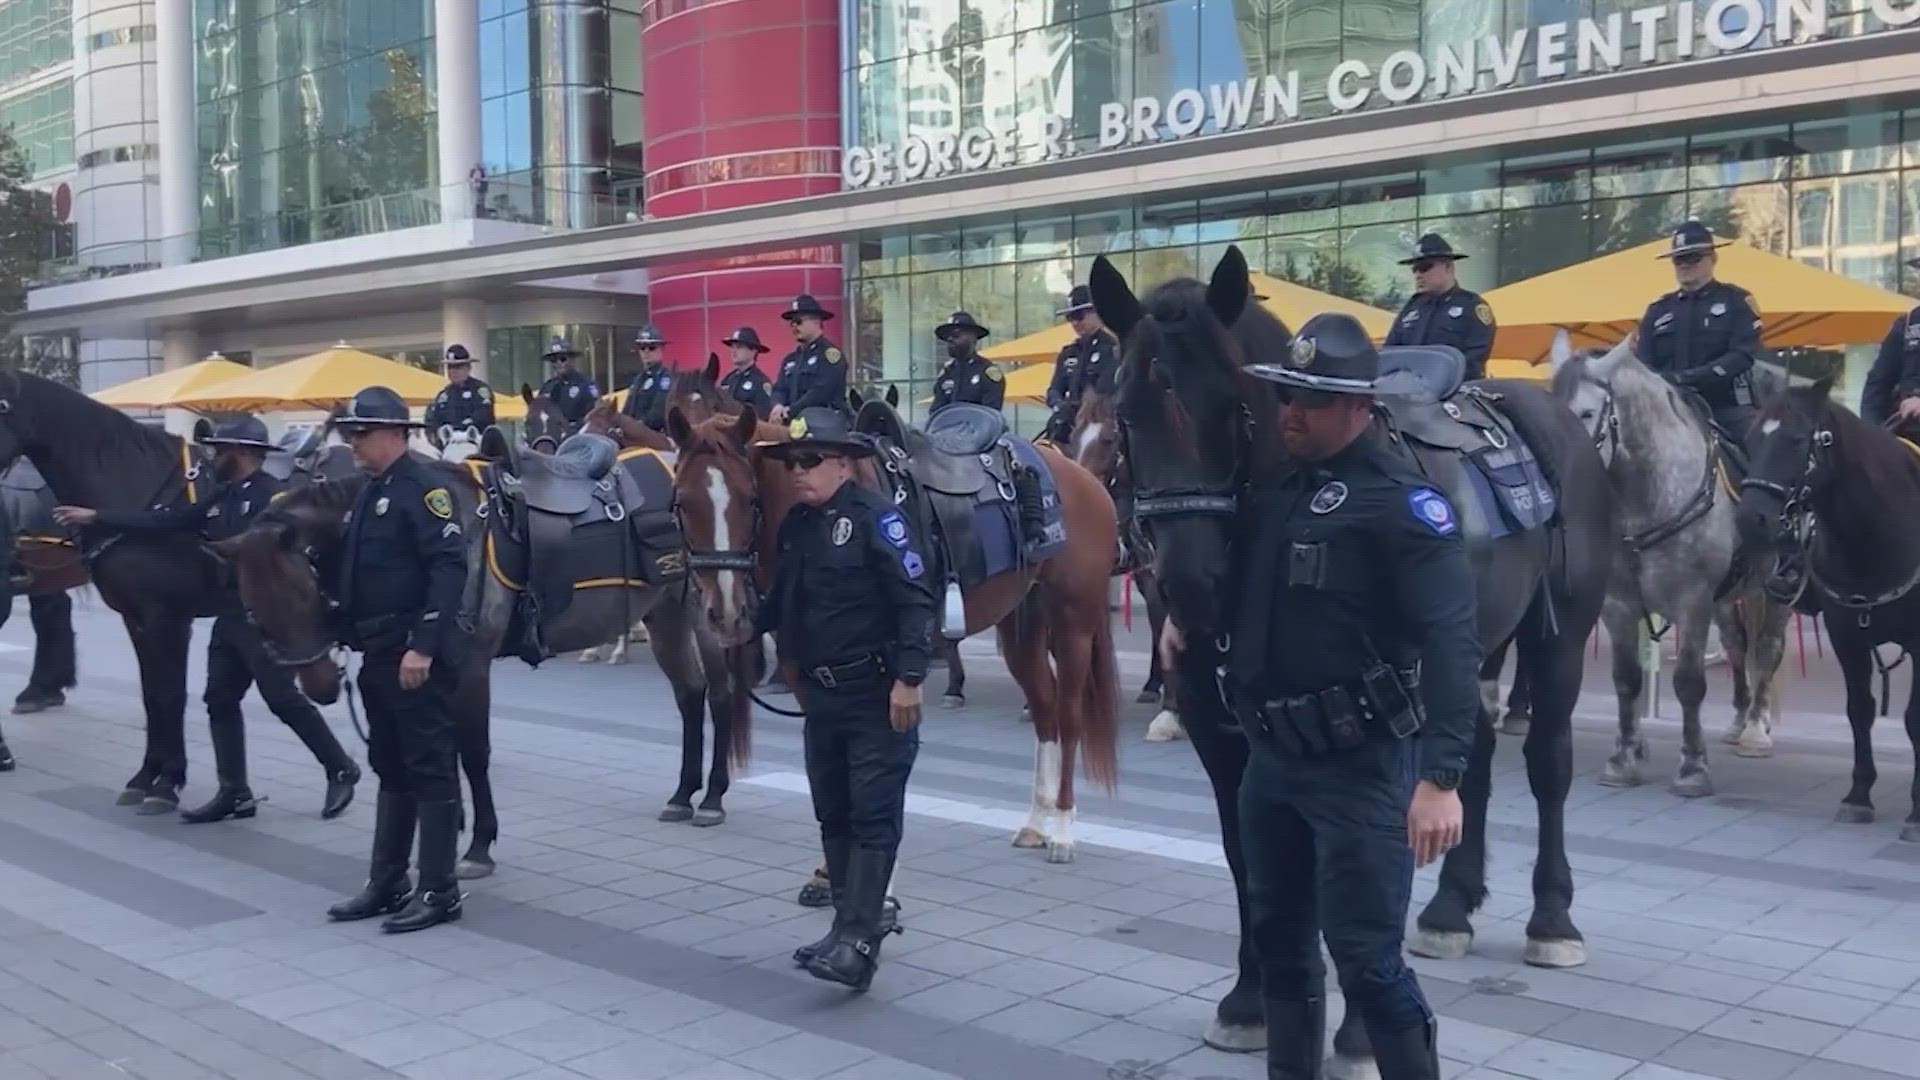 Mounted patrol officers are used for big events like sports events and protests. HPD now has 31 mounted patrol officers.